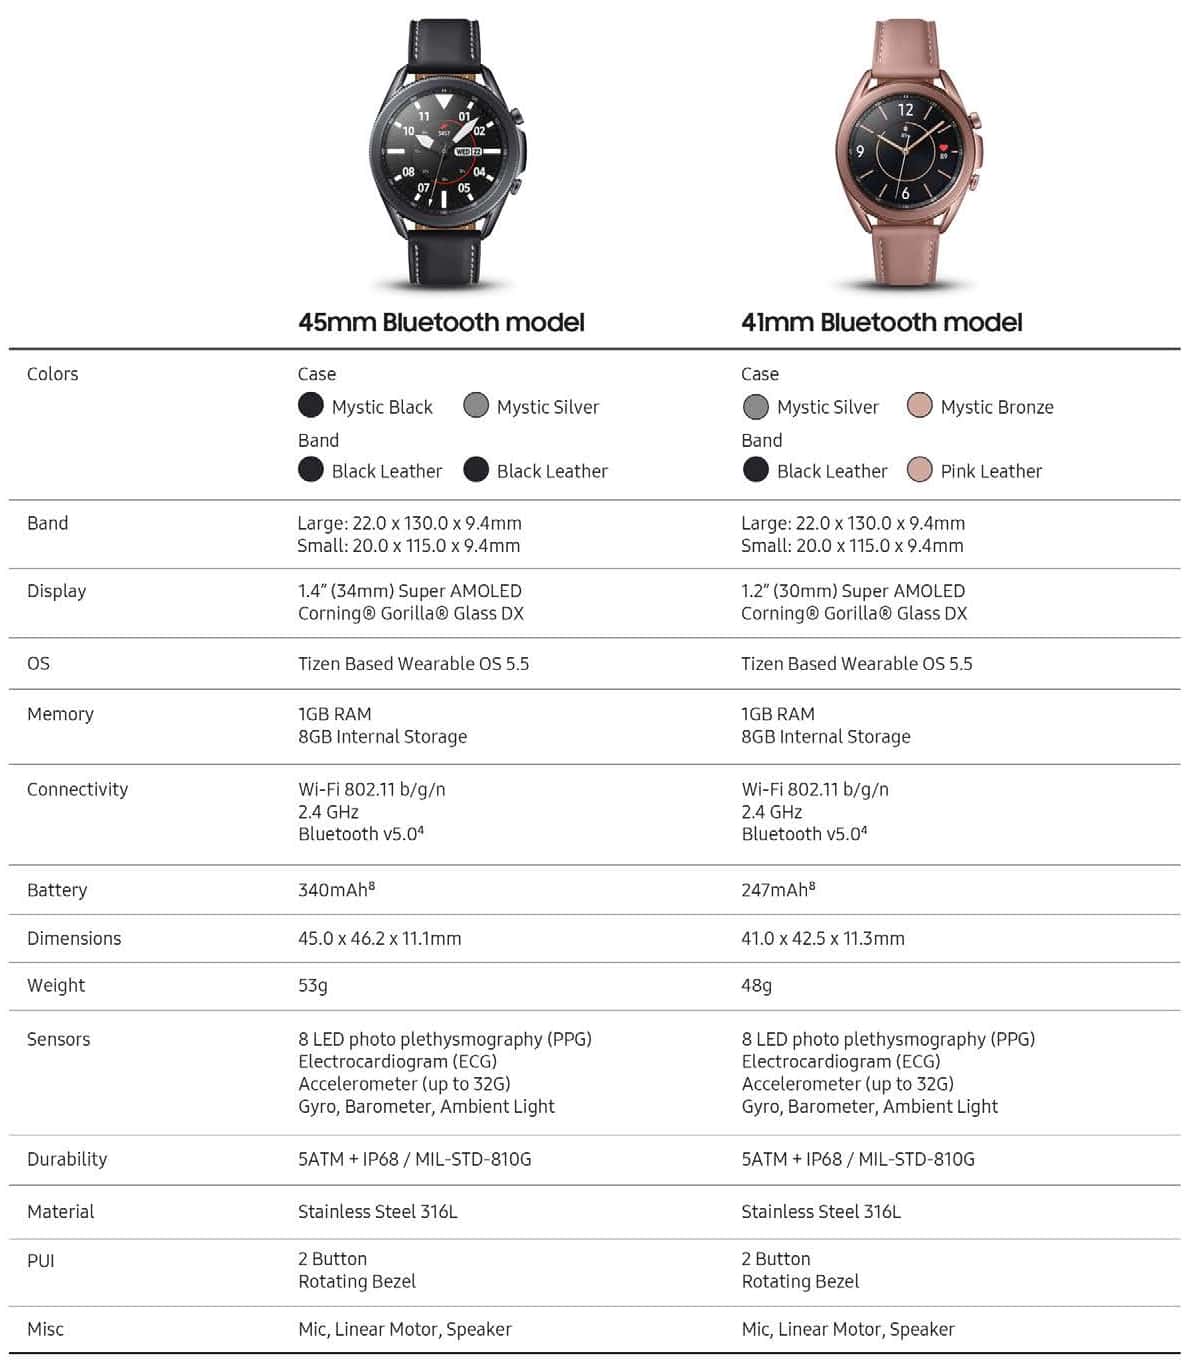 Samsung Galaxy Watch3 announced with rotating bezel, LTE support and